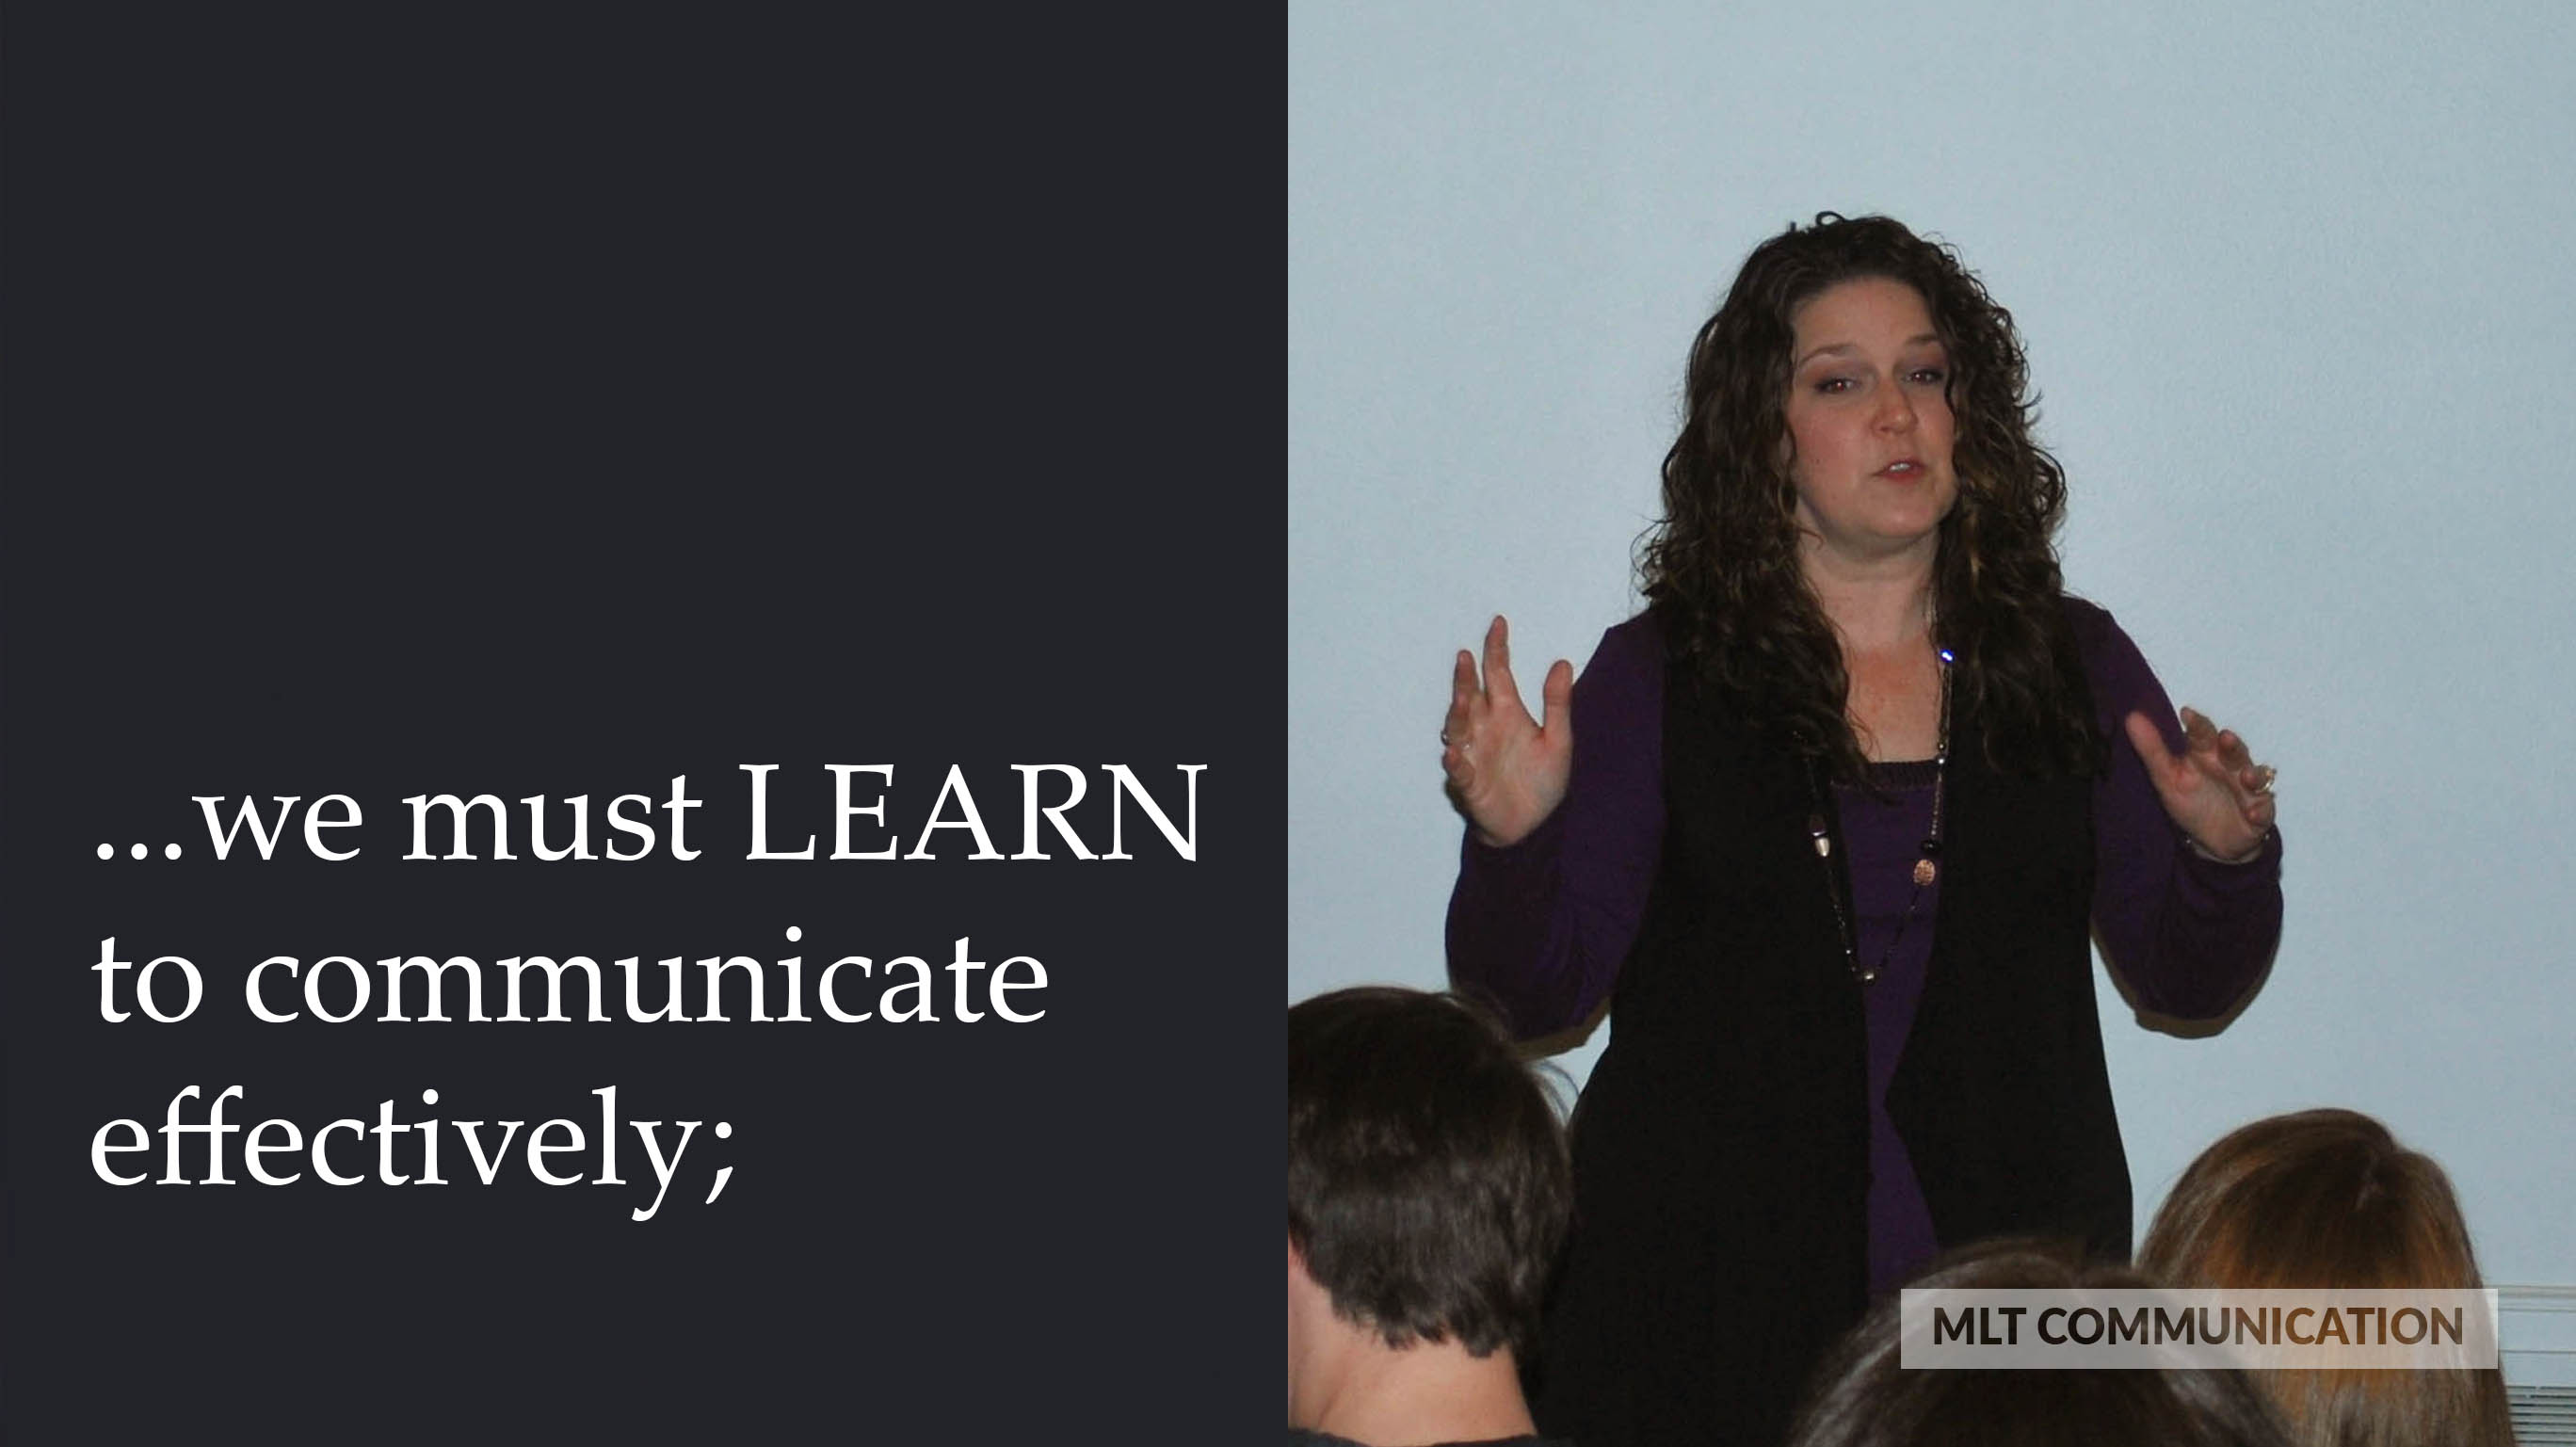 we must LEARN to communicate effectively